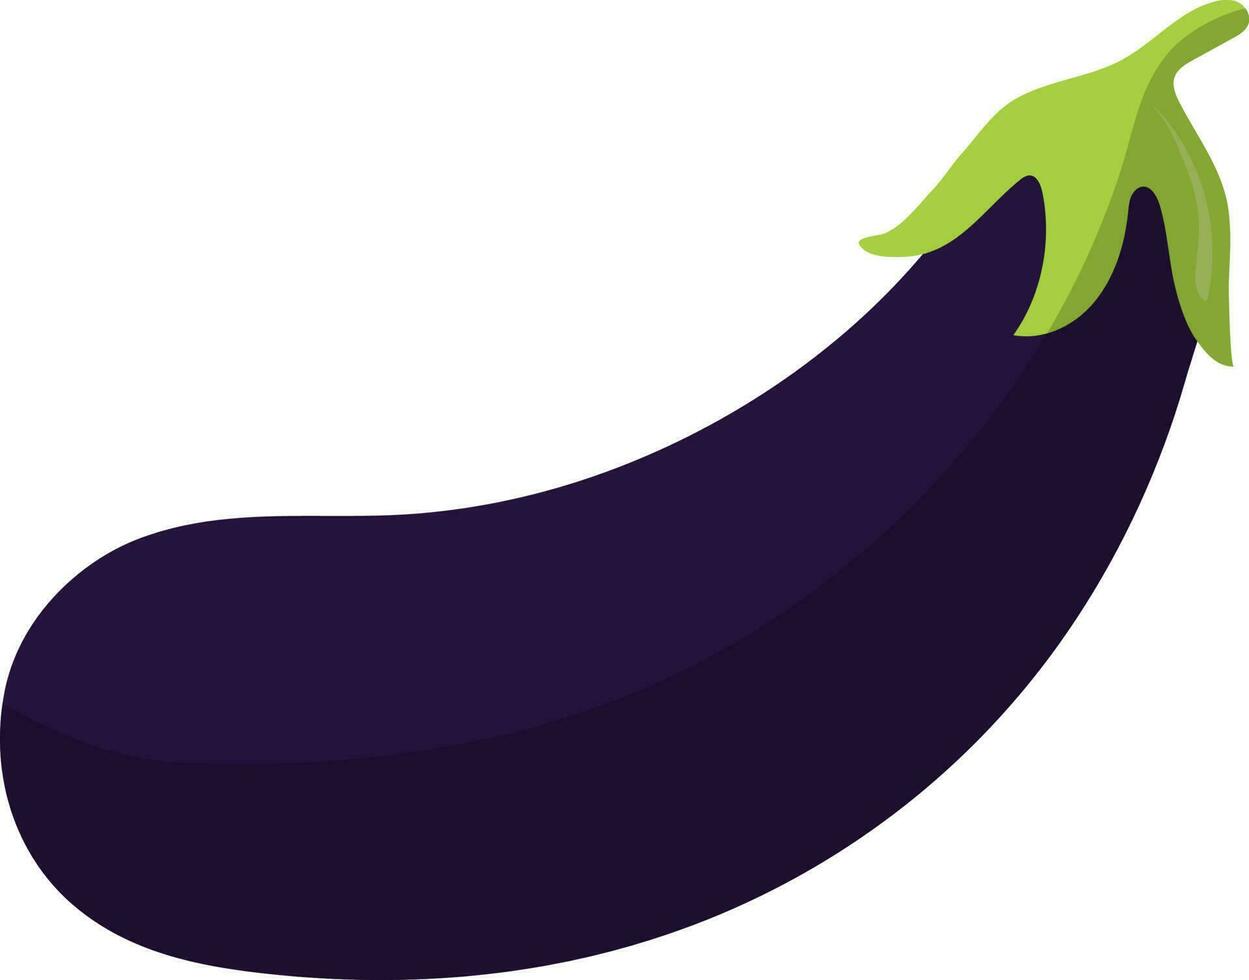 Aubergine icon in isolated for agriculture in half shadow. vector